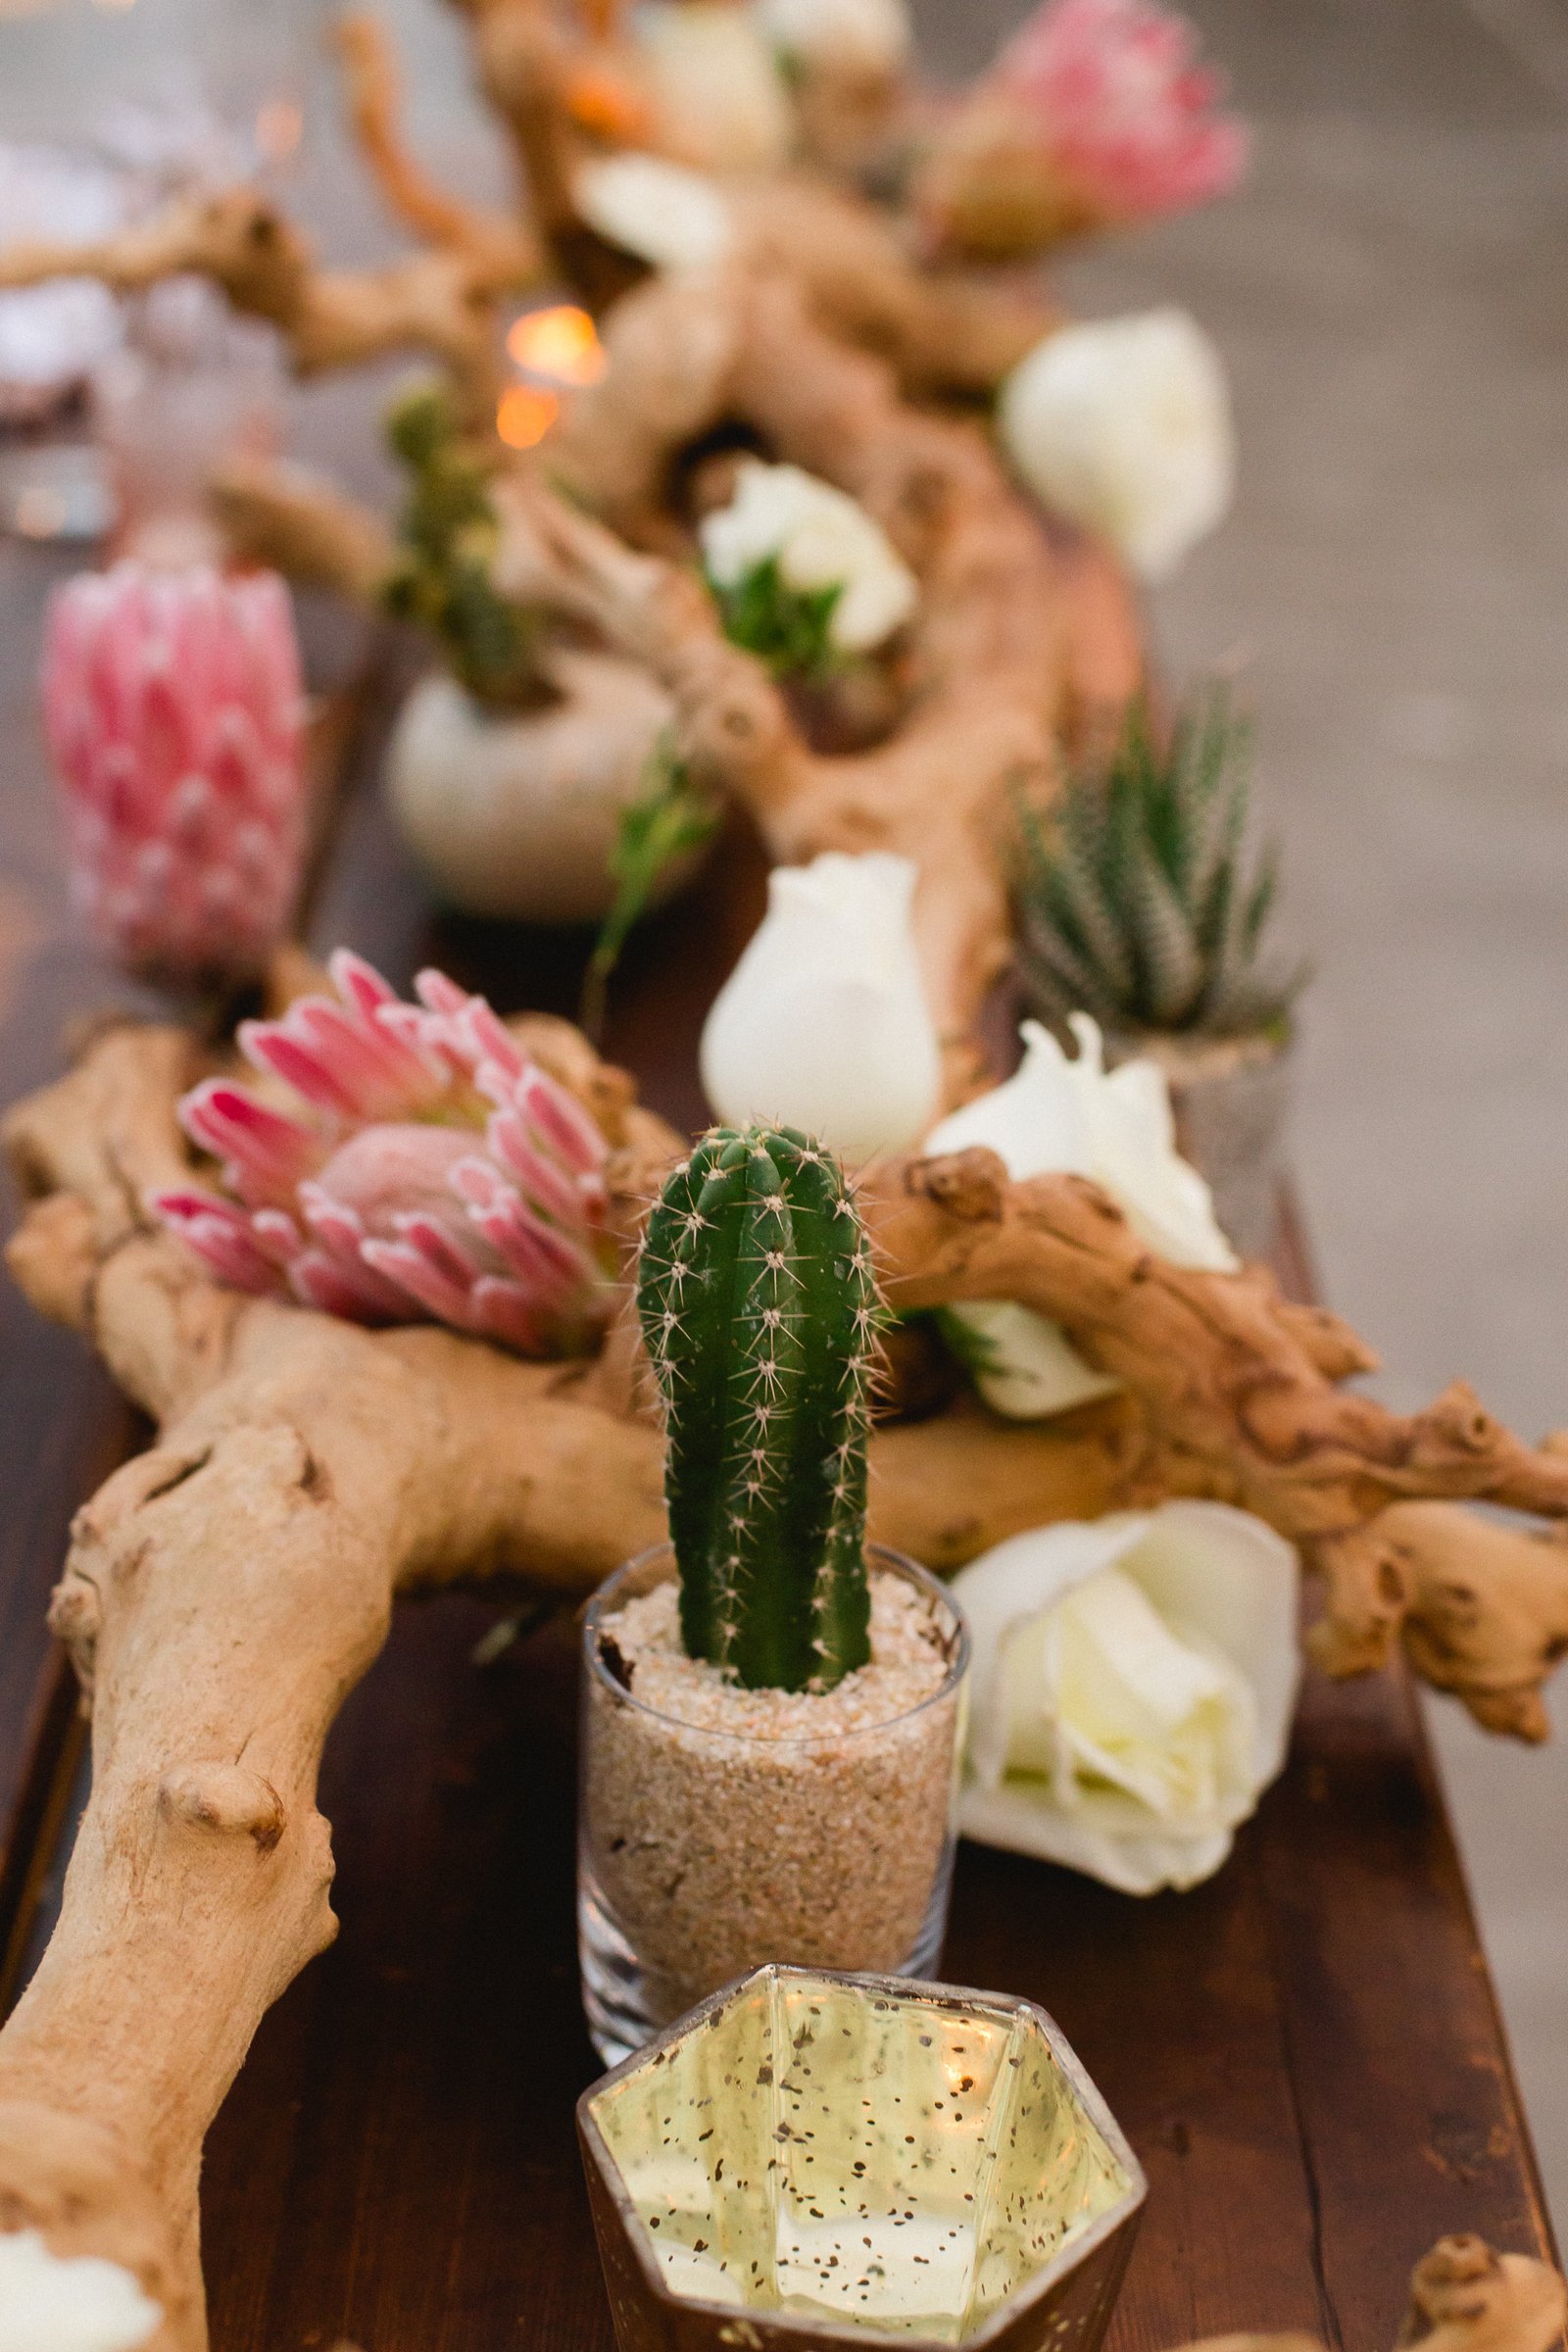 Table setting with Drift wood, cactuses and beautiful proteas. Wedding venue at The Cape and Wedding Planning by Cabo Wedding Services.